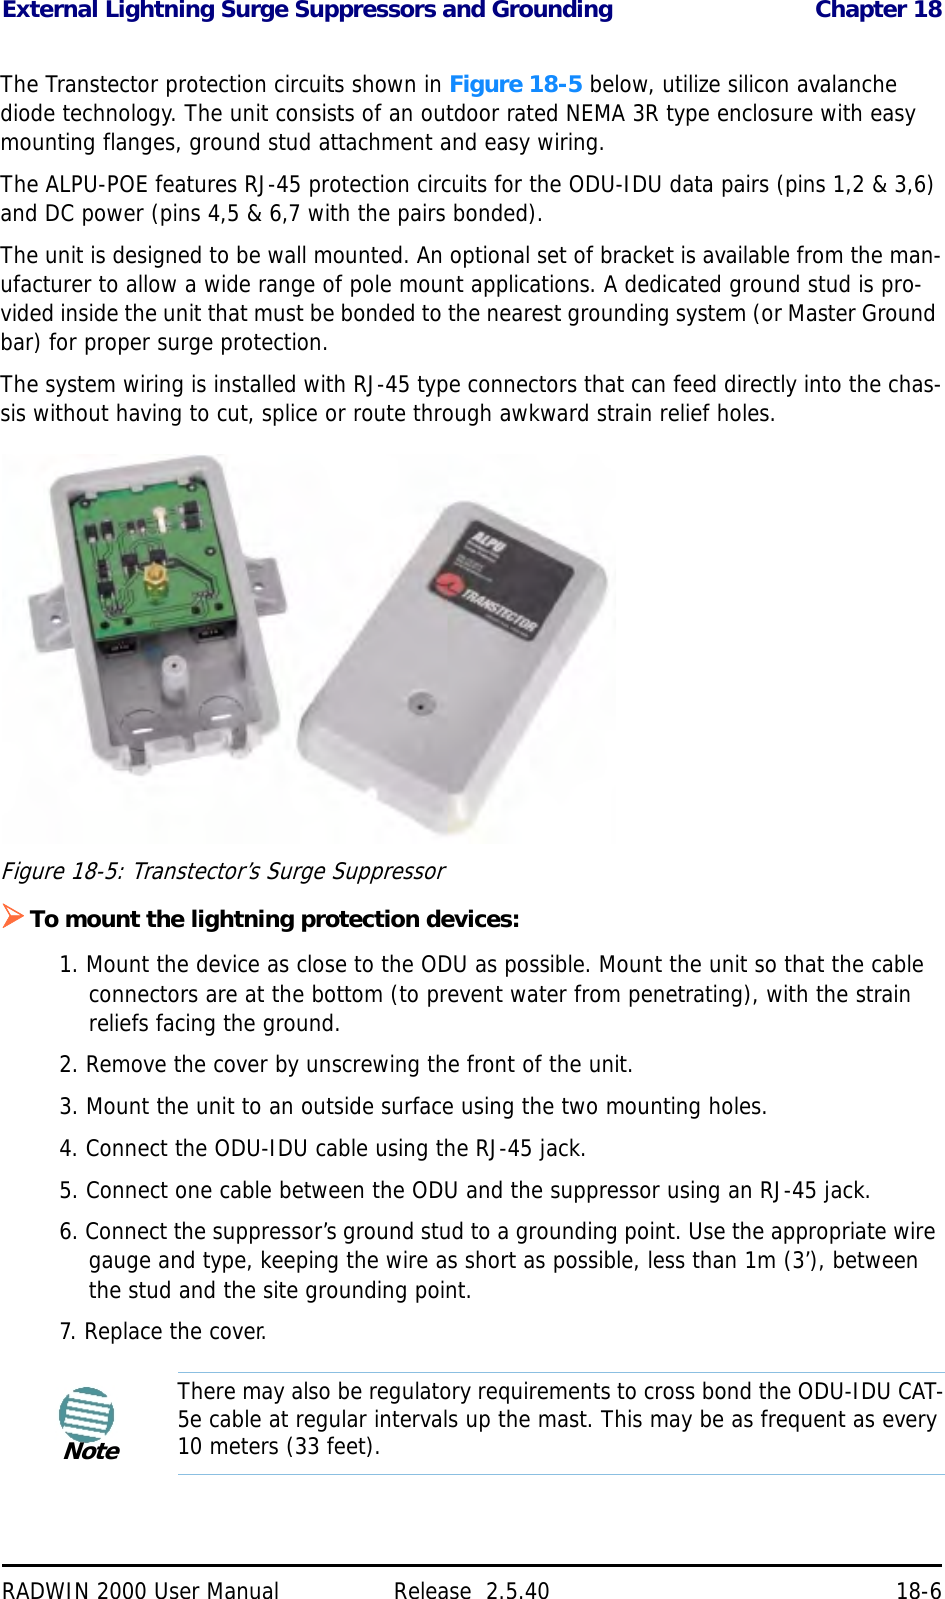 External Lightning Surge Suppressors and Grounding Chapter 18RADWIN 2000 User Manual Release  2.5.40 18-6The Transtector protection circuits shown in Figure 18-5 below, utilize silicon avalanche diode technology. The unit consists of an outdoor rated NEMA 3R type enclosure with easy mounting flanges, ground stud attachment and easy wiring.The ALPU-POE features RJ-45 protection circuits for the ODU-IDU data pairs (pins 1,2 &amp; 3,6) and DC power (pins 4,5 &amp; 6,7 with the pairs bonded).The unit is designed to be wall mounted. An optional set of bracket is available from the man-ufacturer to allow a wide range of pole mount applications. A dedicated ground stud is pro-vided inside the unit that must be bonded to the nearest grounding system (or Master Ground bar) for proper surge protection.The system wiring is installed with RJ-45 type connectors that can feed directly into the chas-sis without having to cut, splice or route through awkward strain relief holes.Figure 18-5: Transtector’s Surge SuppressorTo mount the lightning protection devices:1. Mount the device as close to the ODU as possible. Mount the unit so that the cable connectors are at the bottom (to prevent water from penetrating), with the strain reliefs facing the ground.2. Remove the cover by unscrewing the front of the unit.3. Mount the unit to an outside surface using the two mounting holes.4. Connect the ODU-IDU cable using the RJ-45 jack.5. Connect one cable between the ODU and the suppressor using an RJ-45 jack.6. Connect the suppressor’s ground stud to a grounding point. Use the appropriate wire gauge and type, keeping the wire as short as possible, less than 1m (3’), between the stud and the site grounding point.7. Replace the cover.NoteThere may also be regulatory requirements to cross bond the ODU-IDU CAT-5e cable at regular intervals up the mast. This may be as frequent as every 10 meters (33 feet).